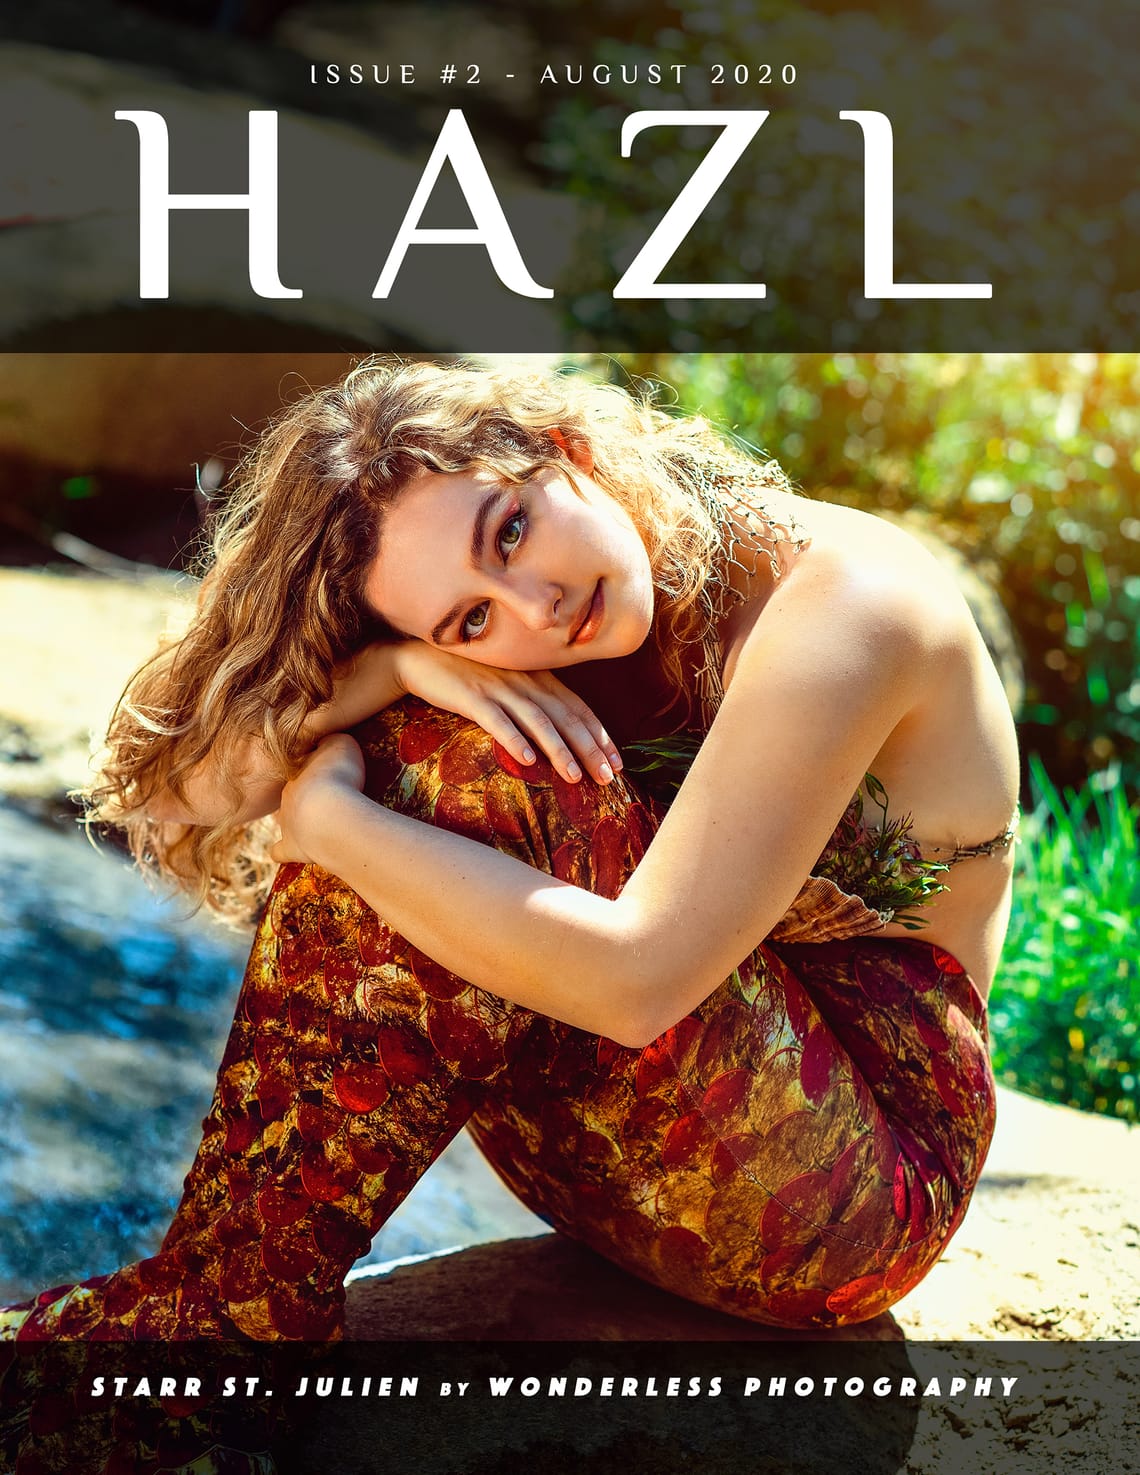 HAZL Magazine Issue #2 -  August 2020 Launched Worldwide